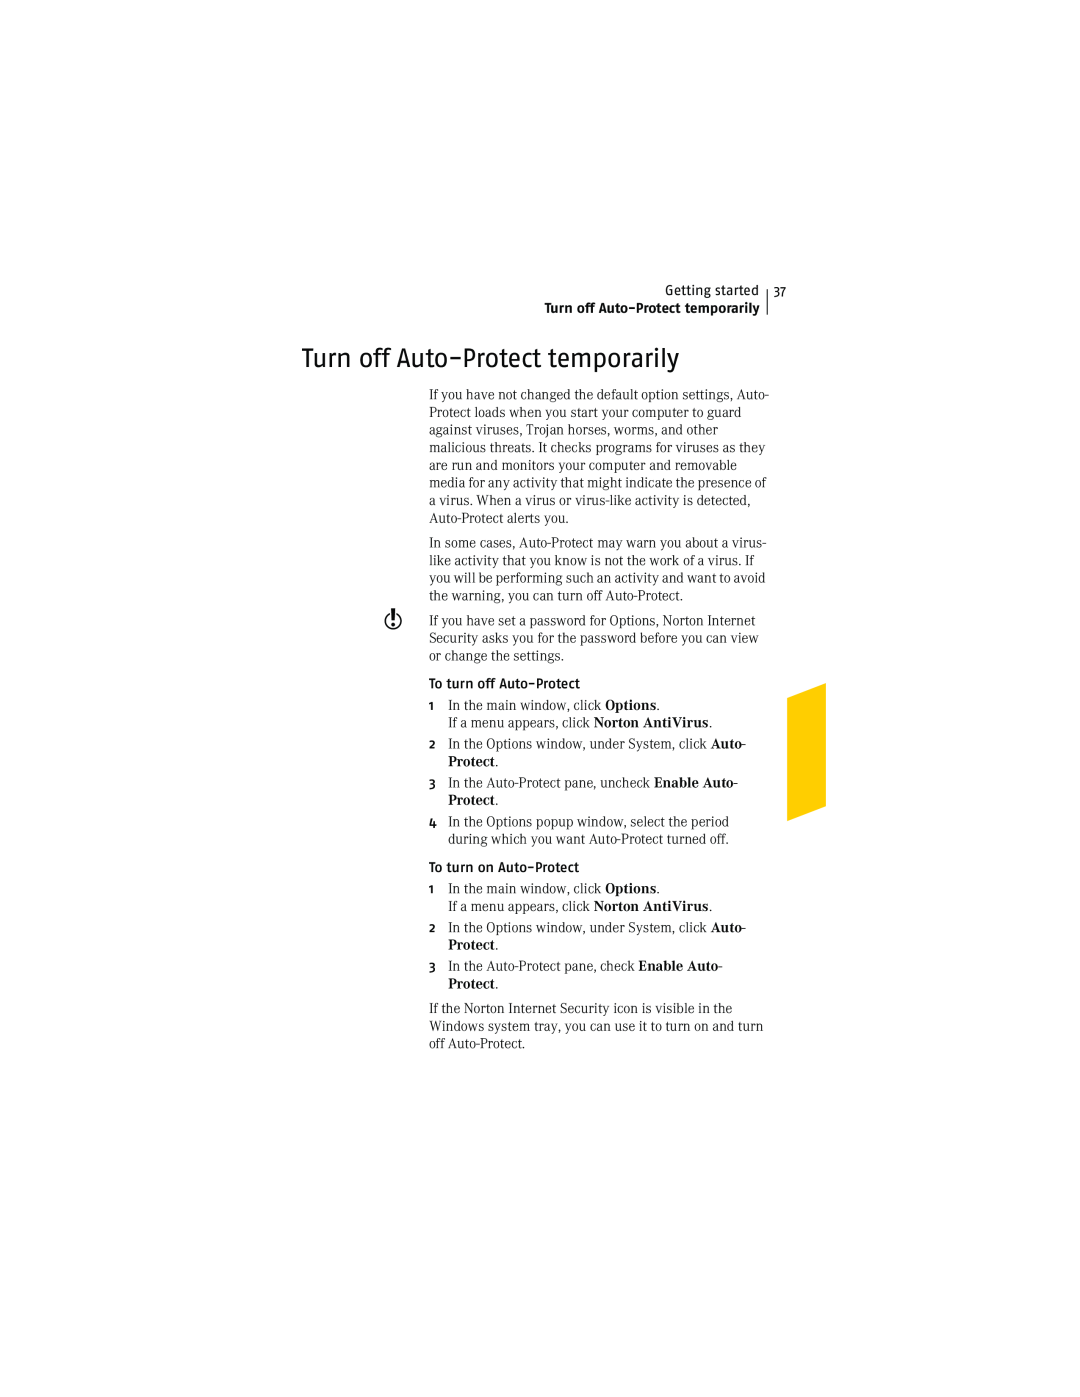 Symantec NIS2005 manual Turn off Auto-Protecttemporarily 